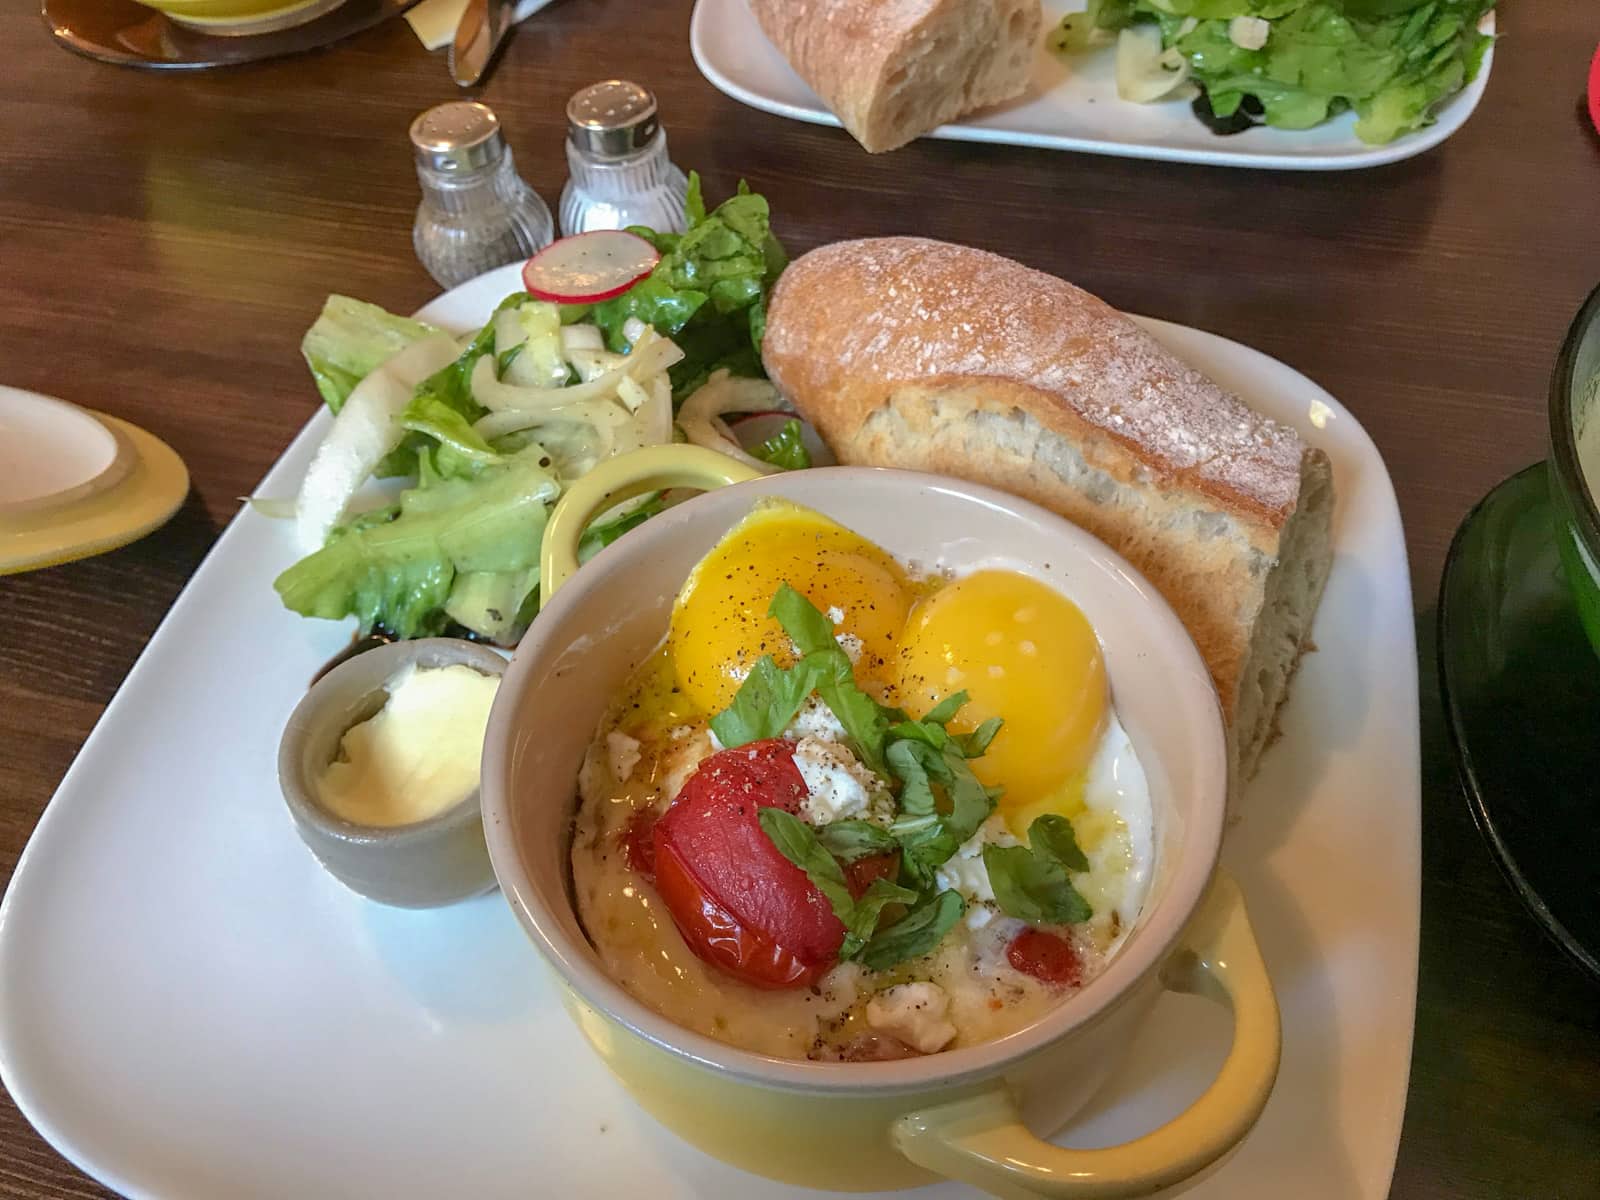 A white plate with ciabatta bread, salad, butter in a small cup, and a small pot of baked eggs